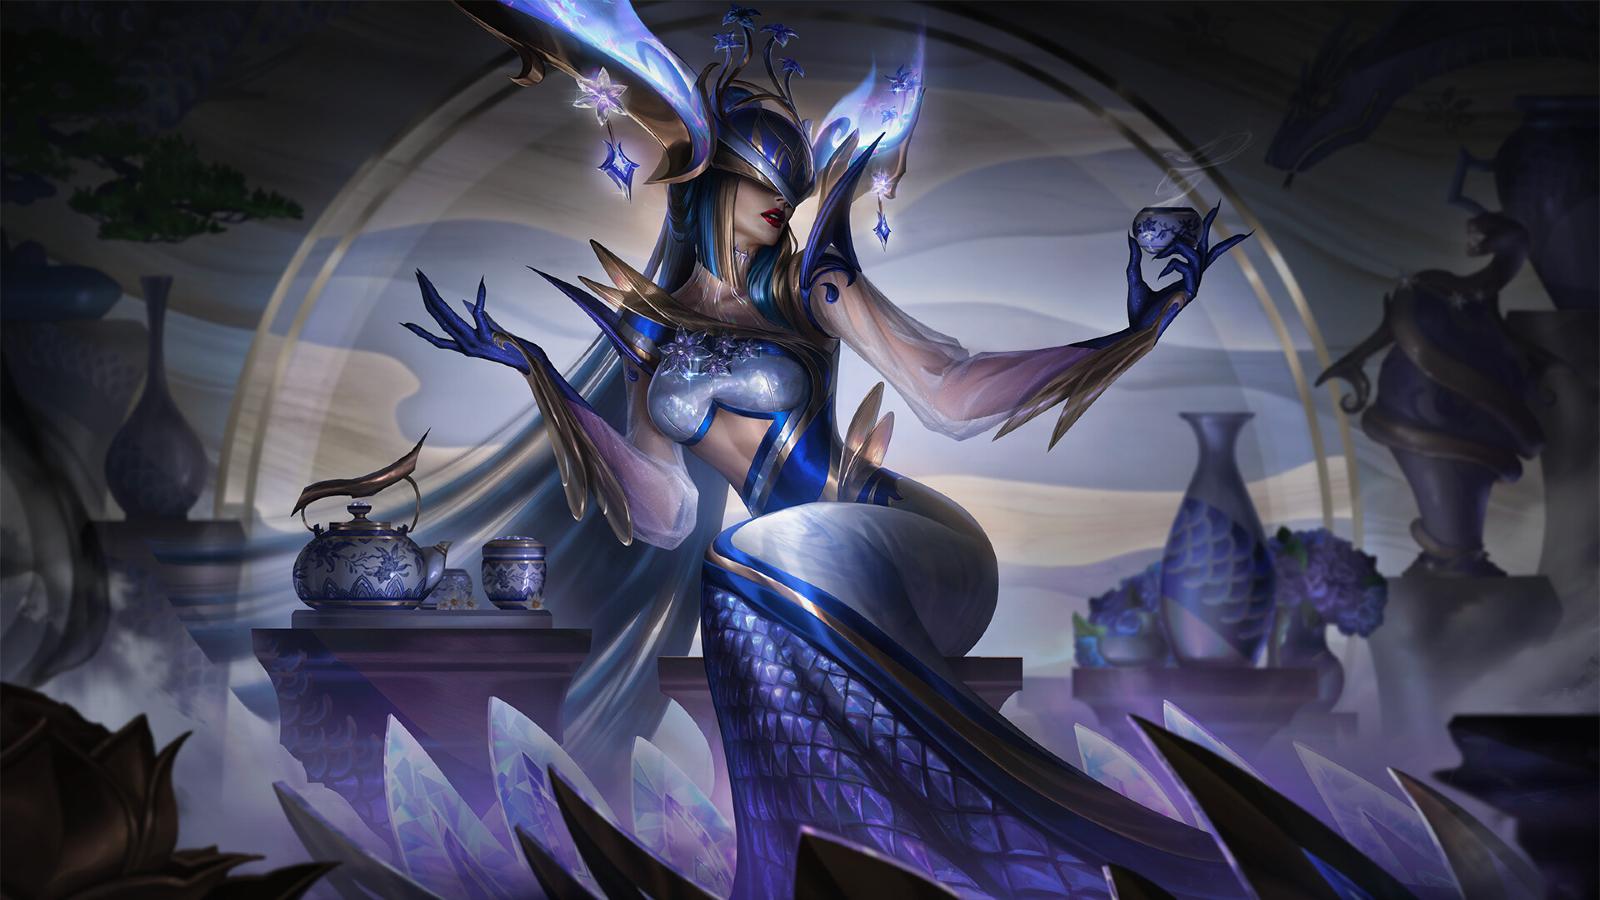 Lol Patch Notes 13.23 and League of Legends Patch Schedule - News